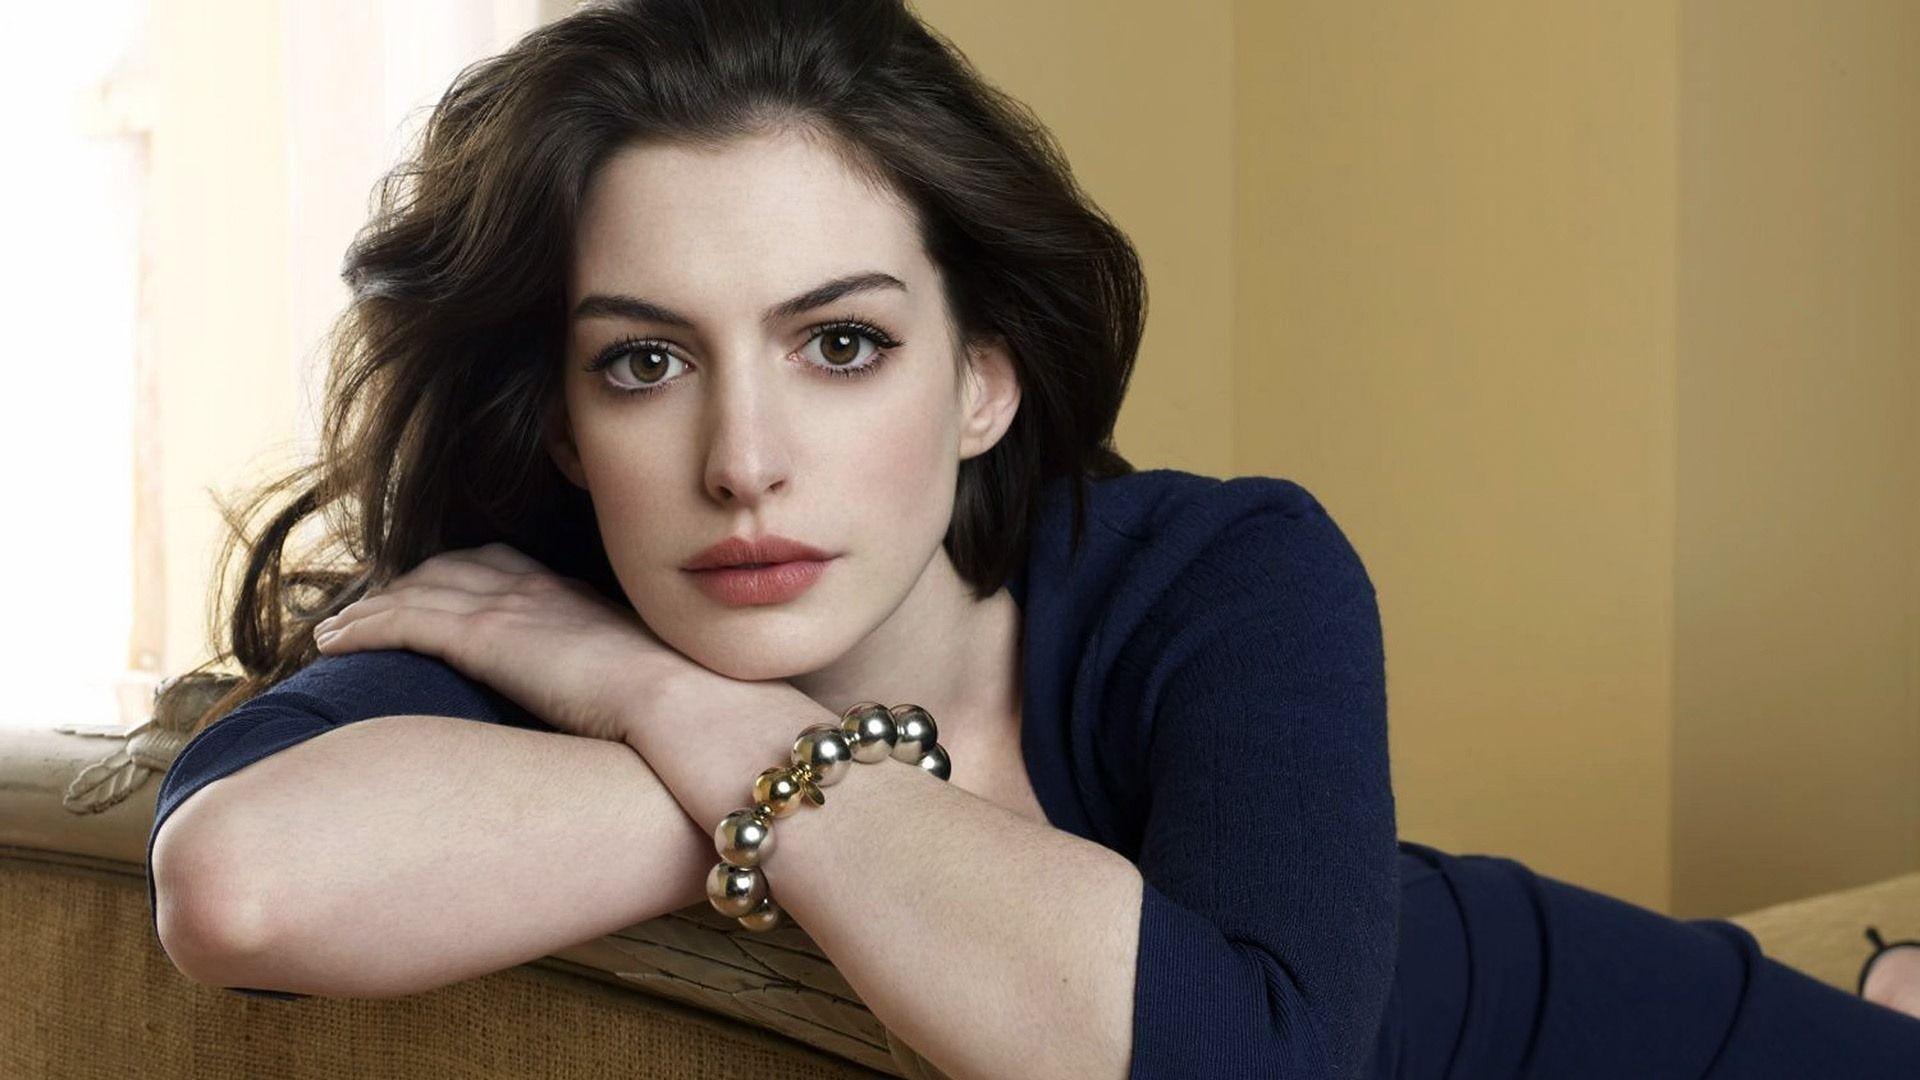 Anne Hathaway Picture 2 HD Image Wallpaper. HD Image Wallpaper